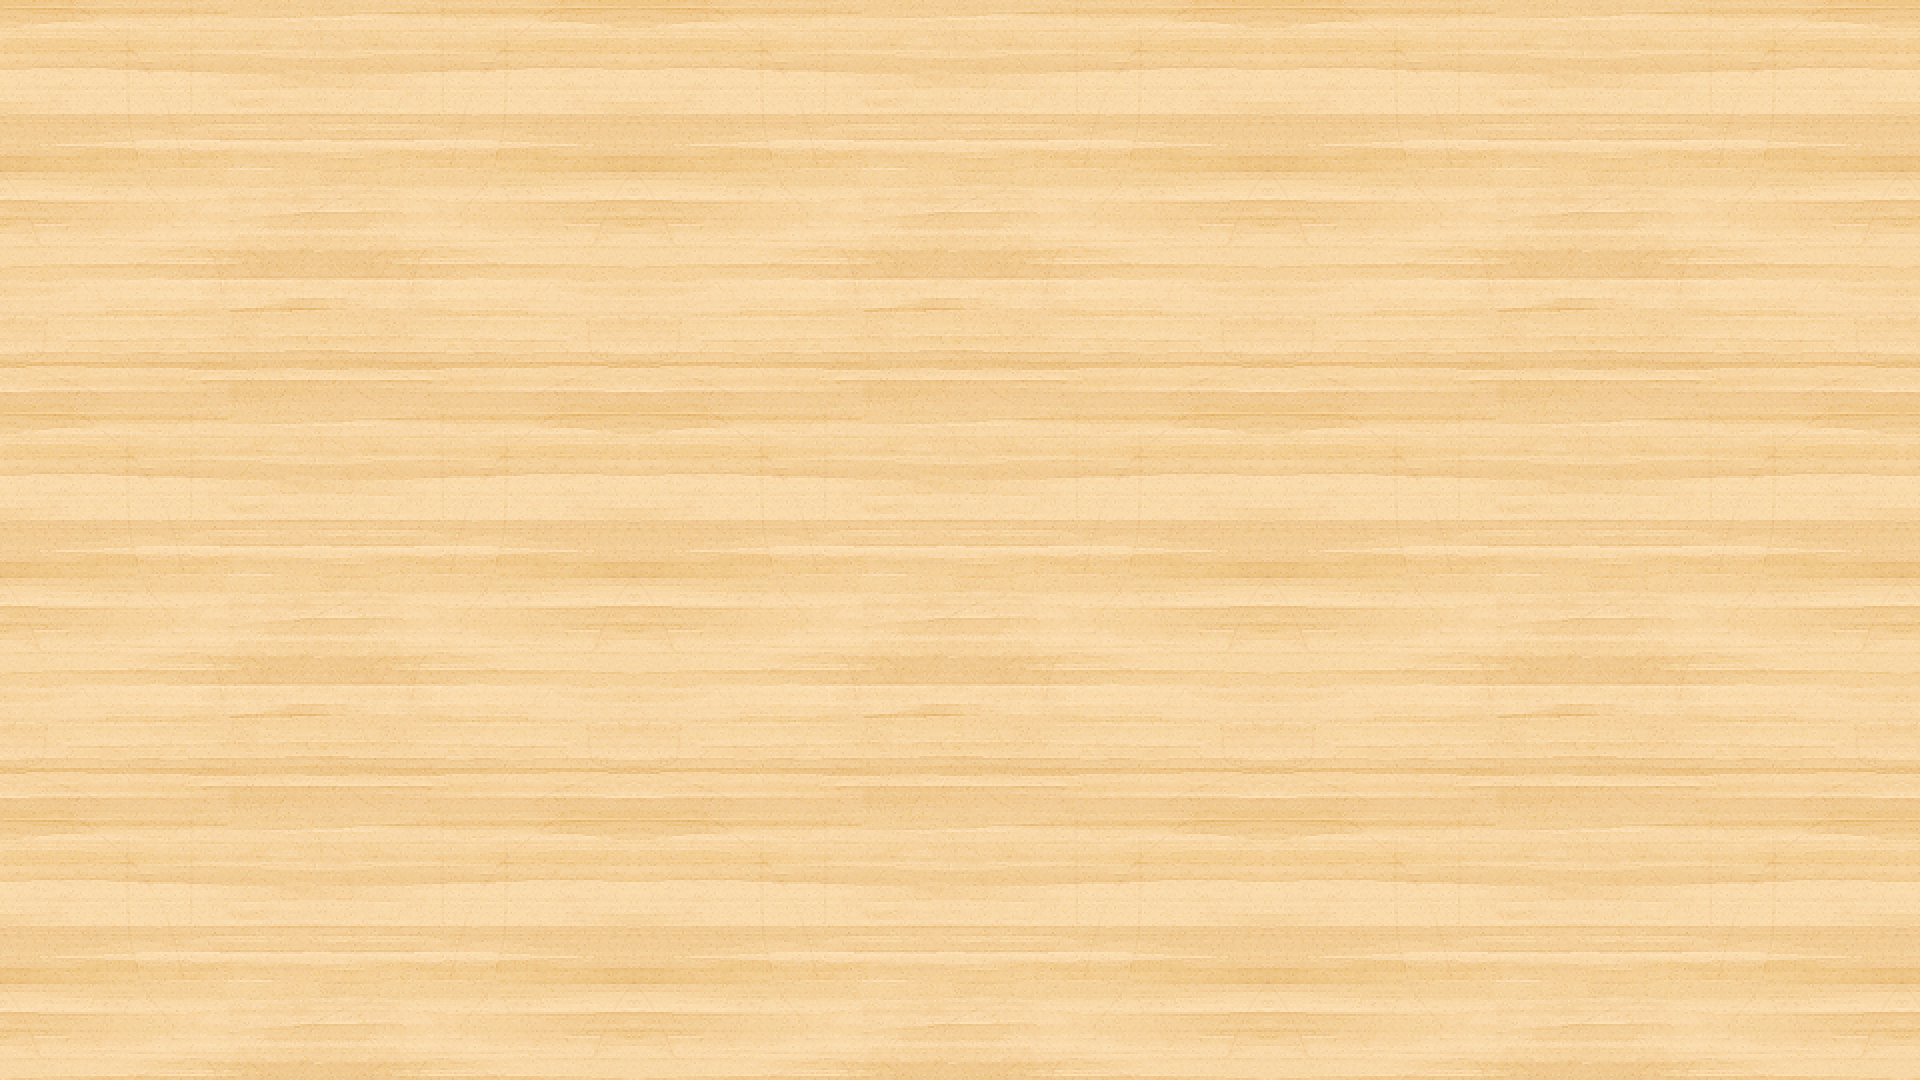 Popular Light Wood Floor Background Displaying Images For Bowling Lane Png - Bowling Lane, Transparent background PNG HD thumbnail